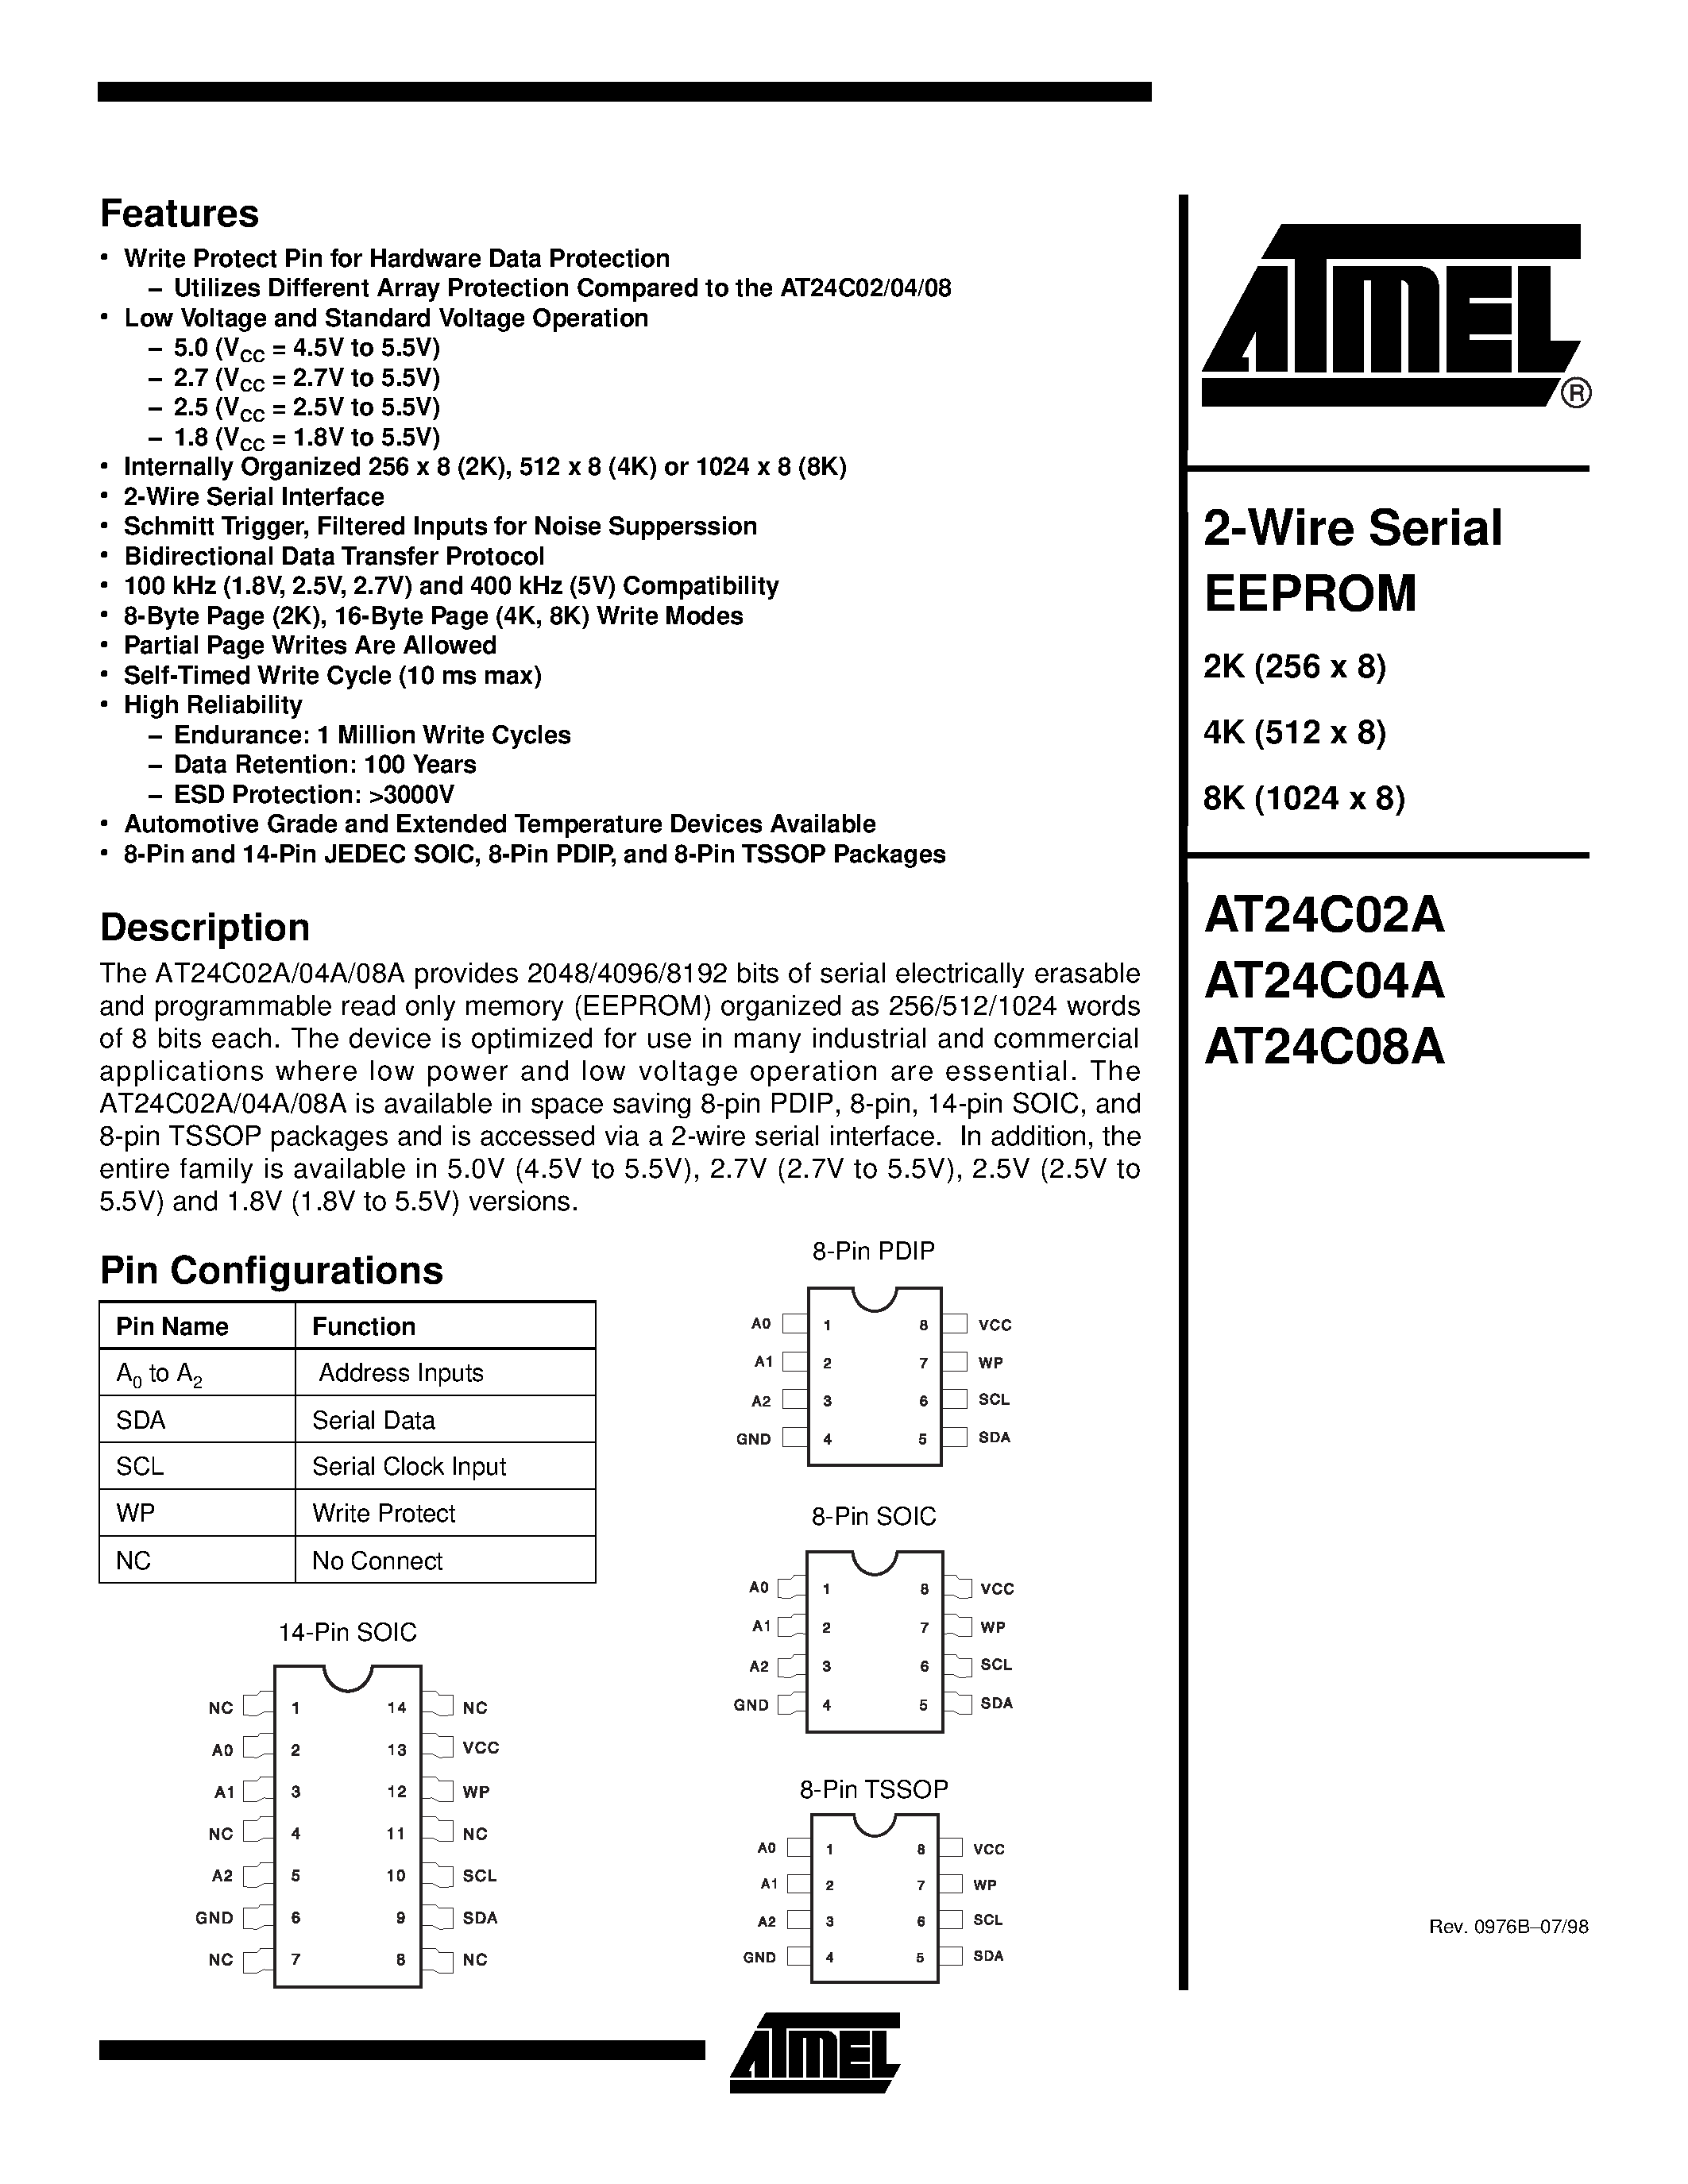 Даташит AT24C08A-10PC-2.5 - 2-Wire Serial EEPROM страница 1